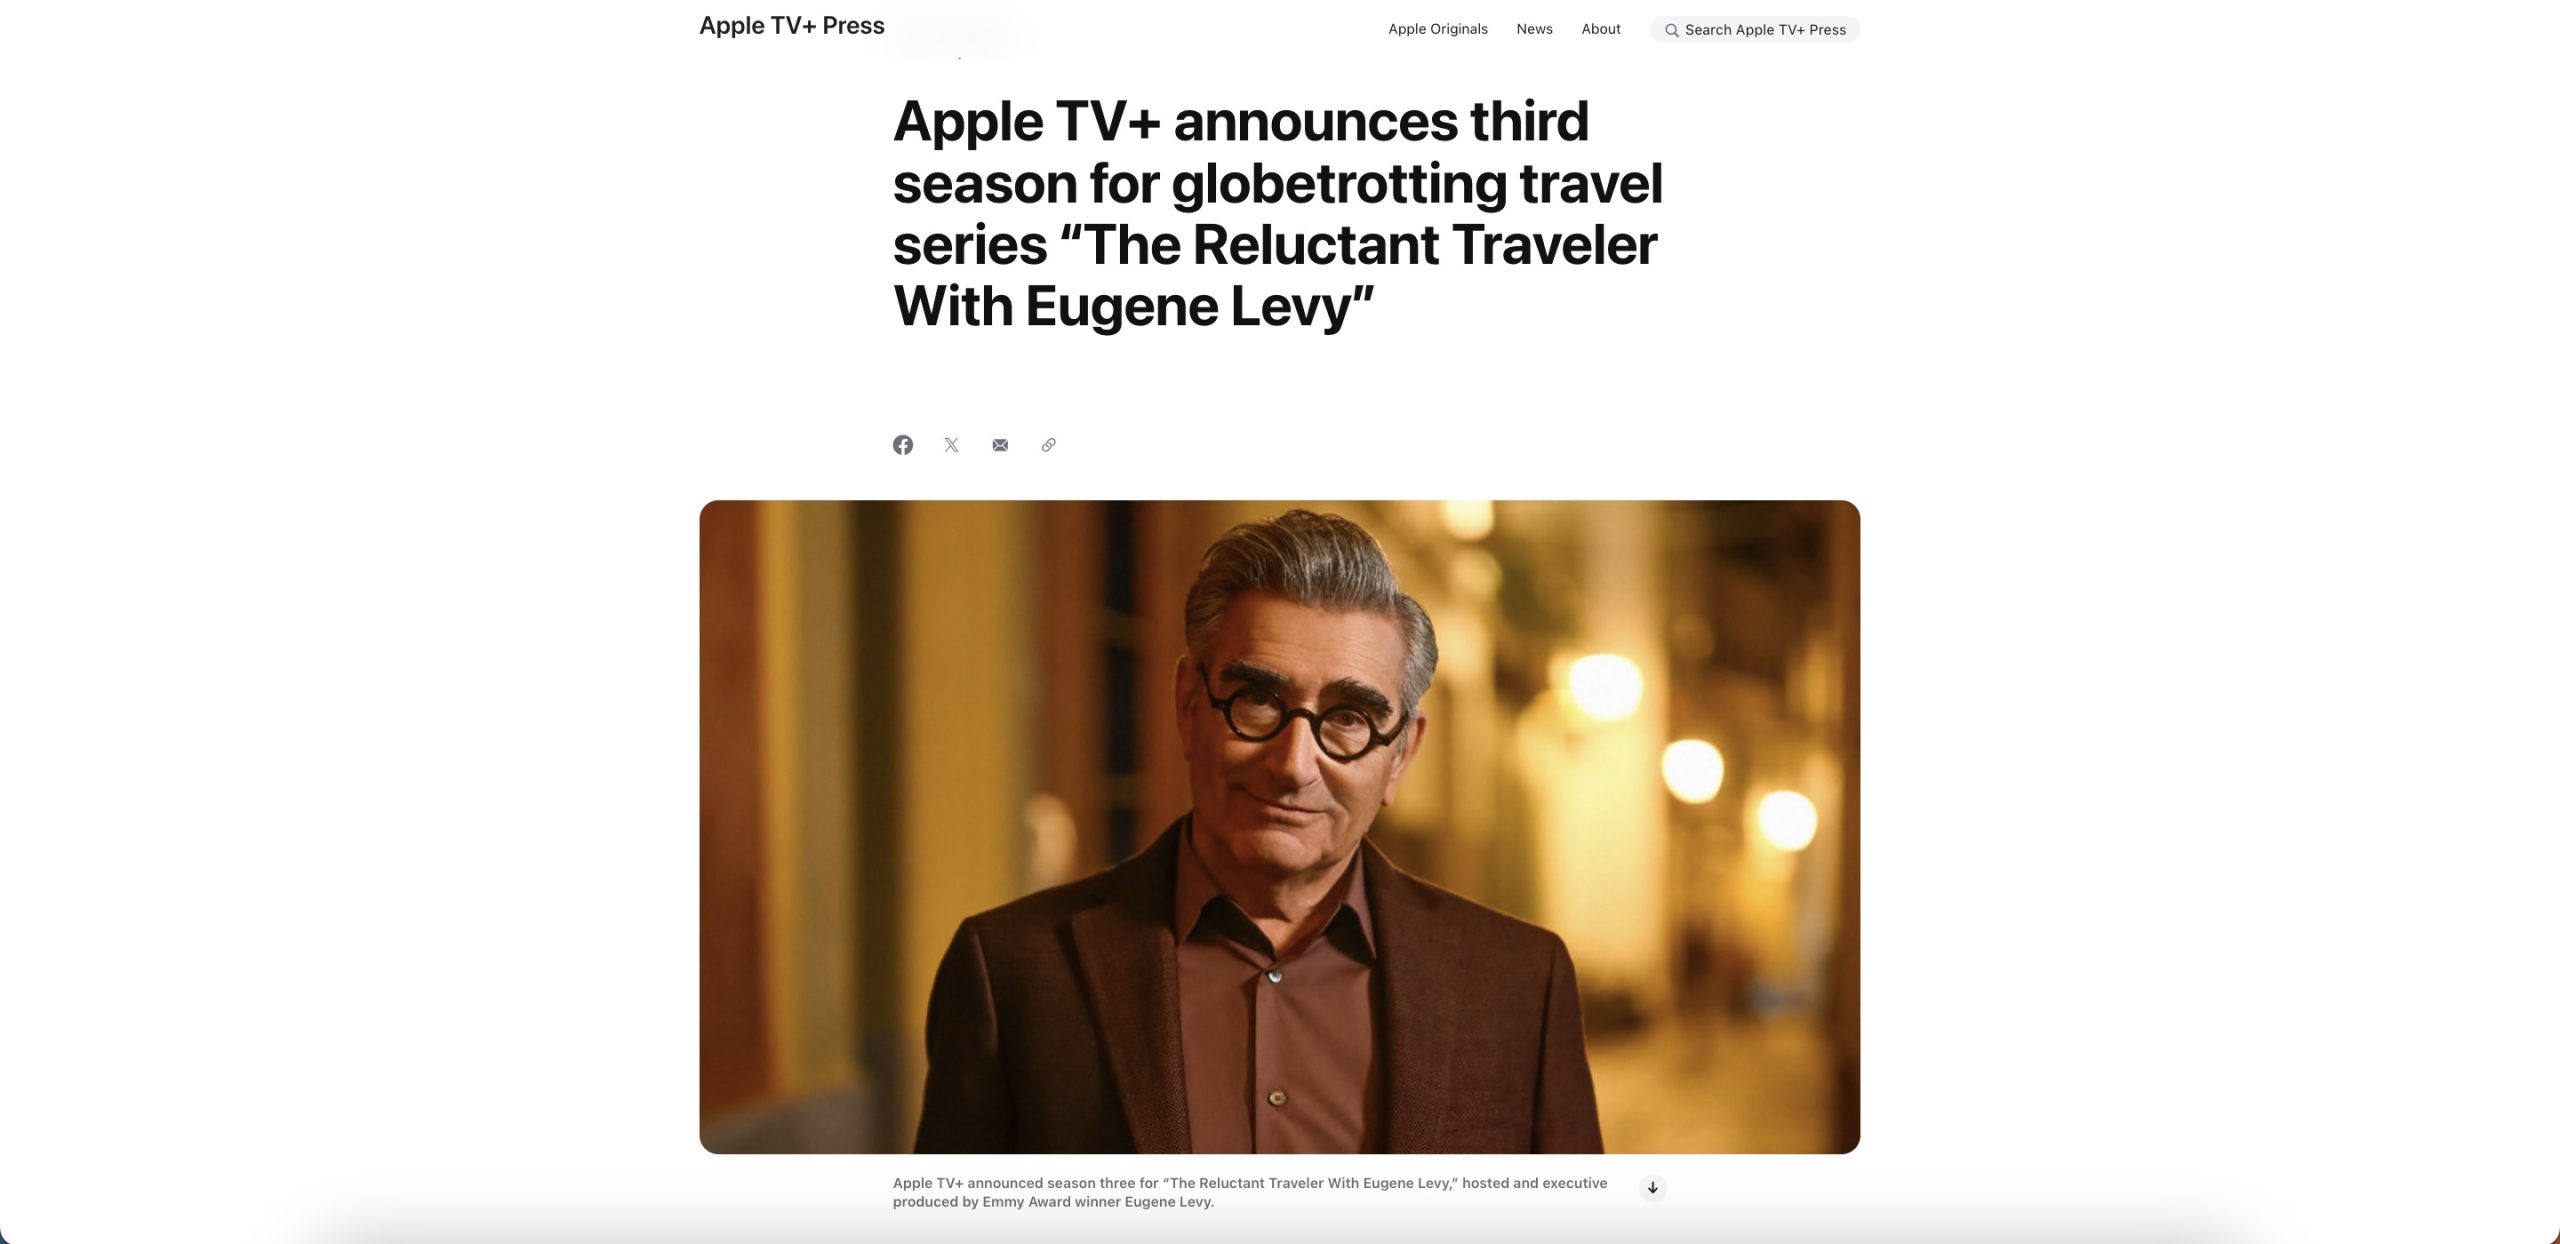 The Reluctant Traveler With Eugene Levy Season 3 Apple TV Plus show